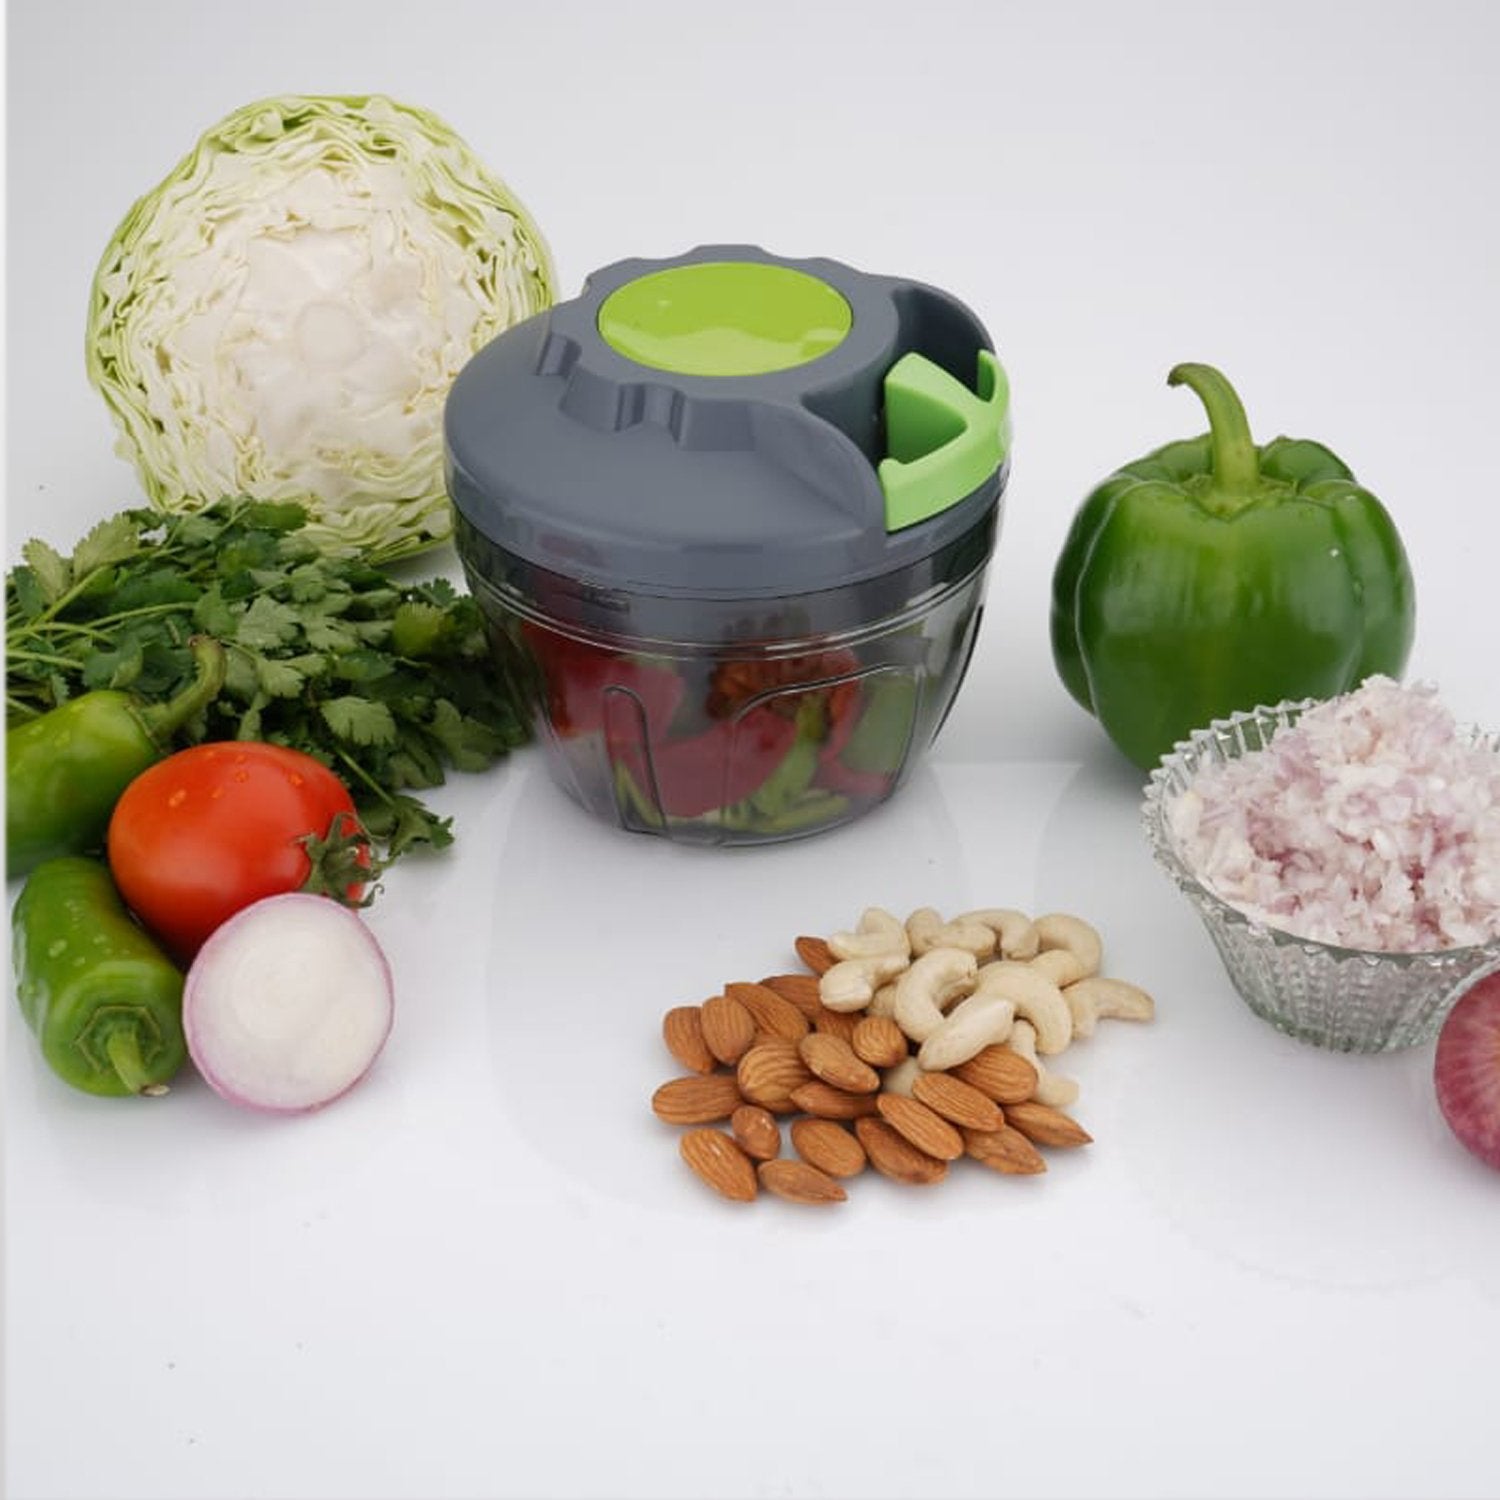 ambitionofcreativity in manual food chopper for vegetable fruits nuts onions chopper blender mixer food processor